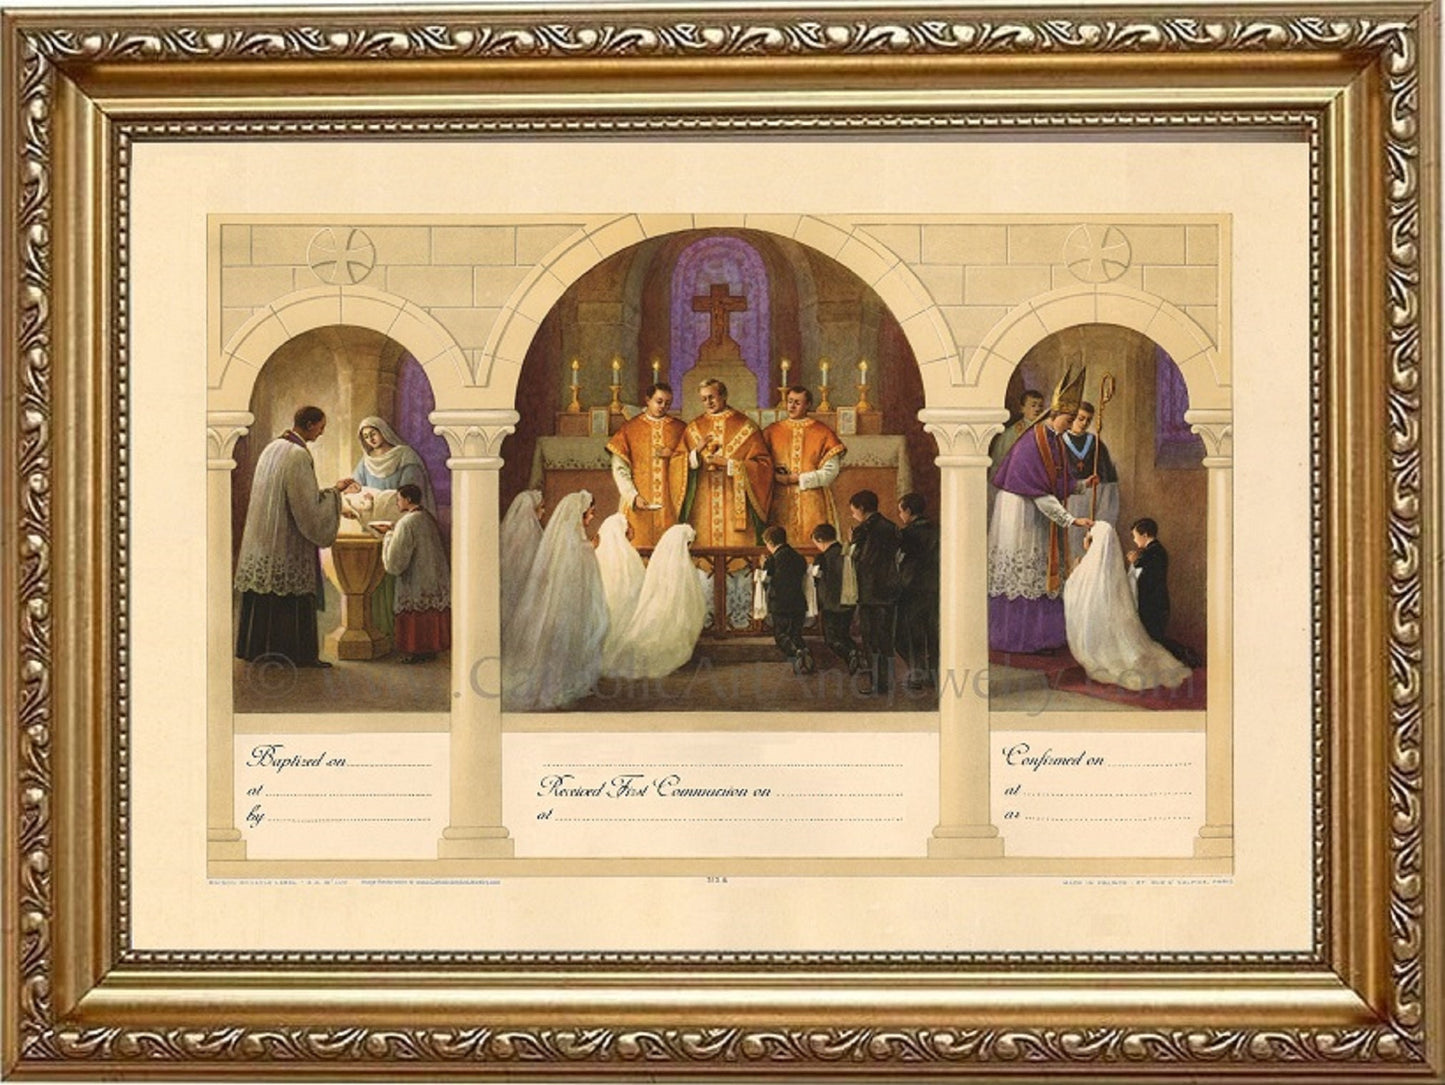 3 Sacraments Certificate – Baptism, First Communion, Confirmation – 2 sizes – Based on a Vintage Certificate